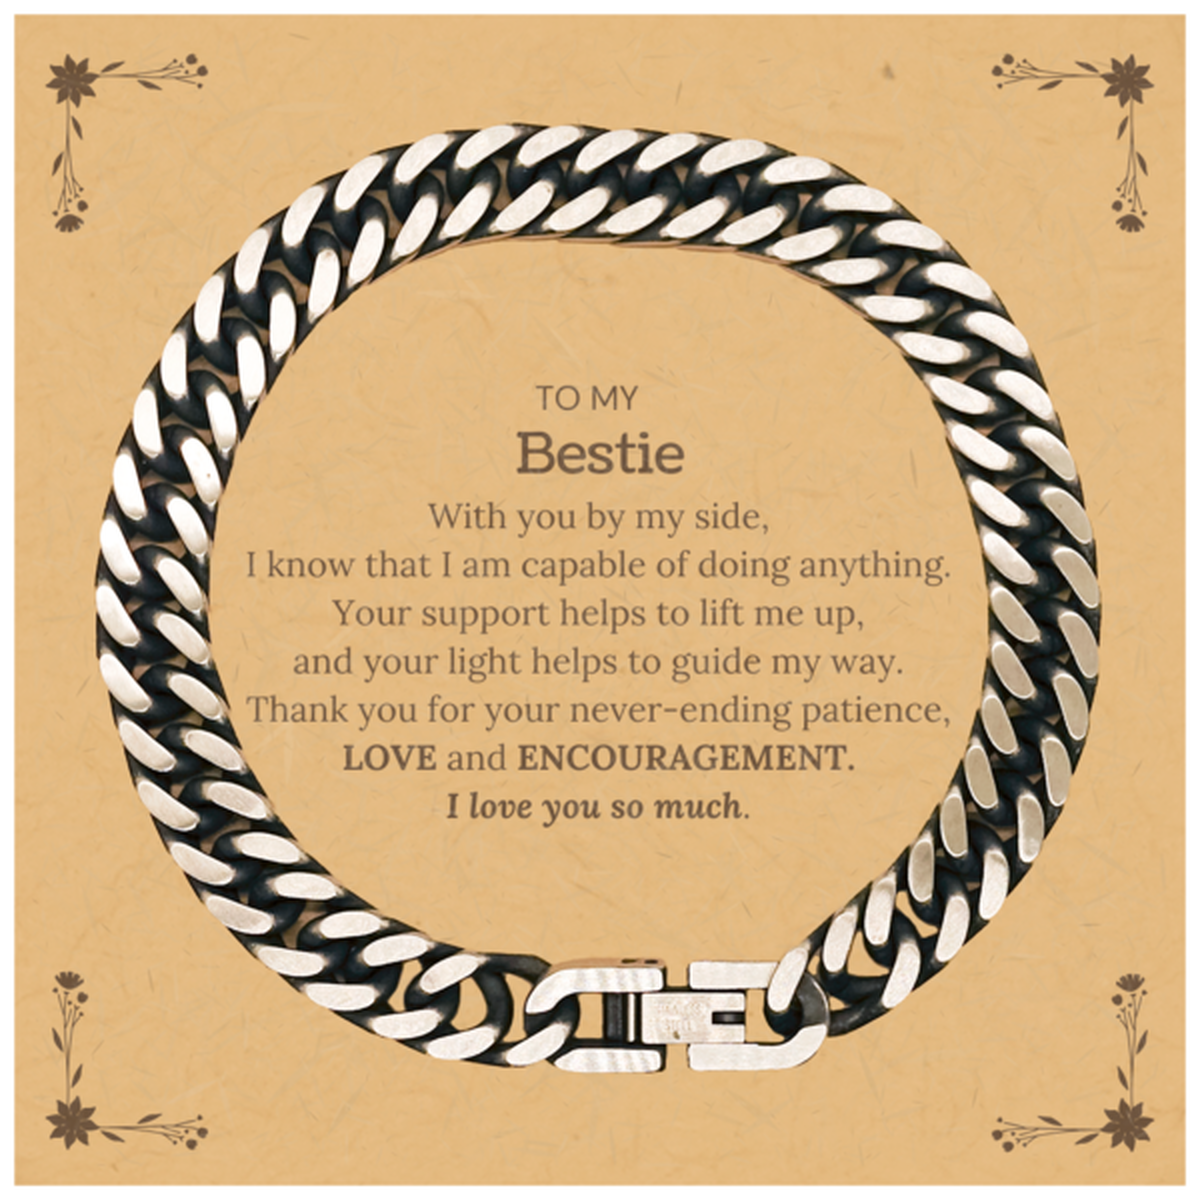 Appreciation Bestie Cuban Link Chain Bracelet Gifts, To My Bestie Birthday Christmas Wedding Keepsake Gifts for Bestie With you by my side, I know that I am capable of doing anything. I love you so much